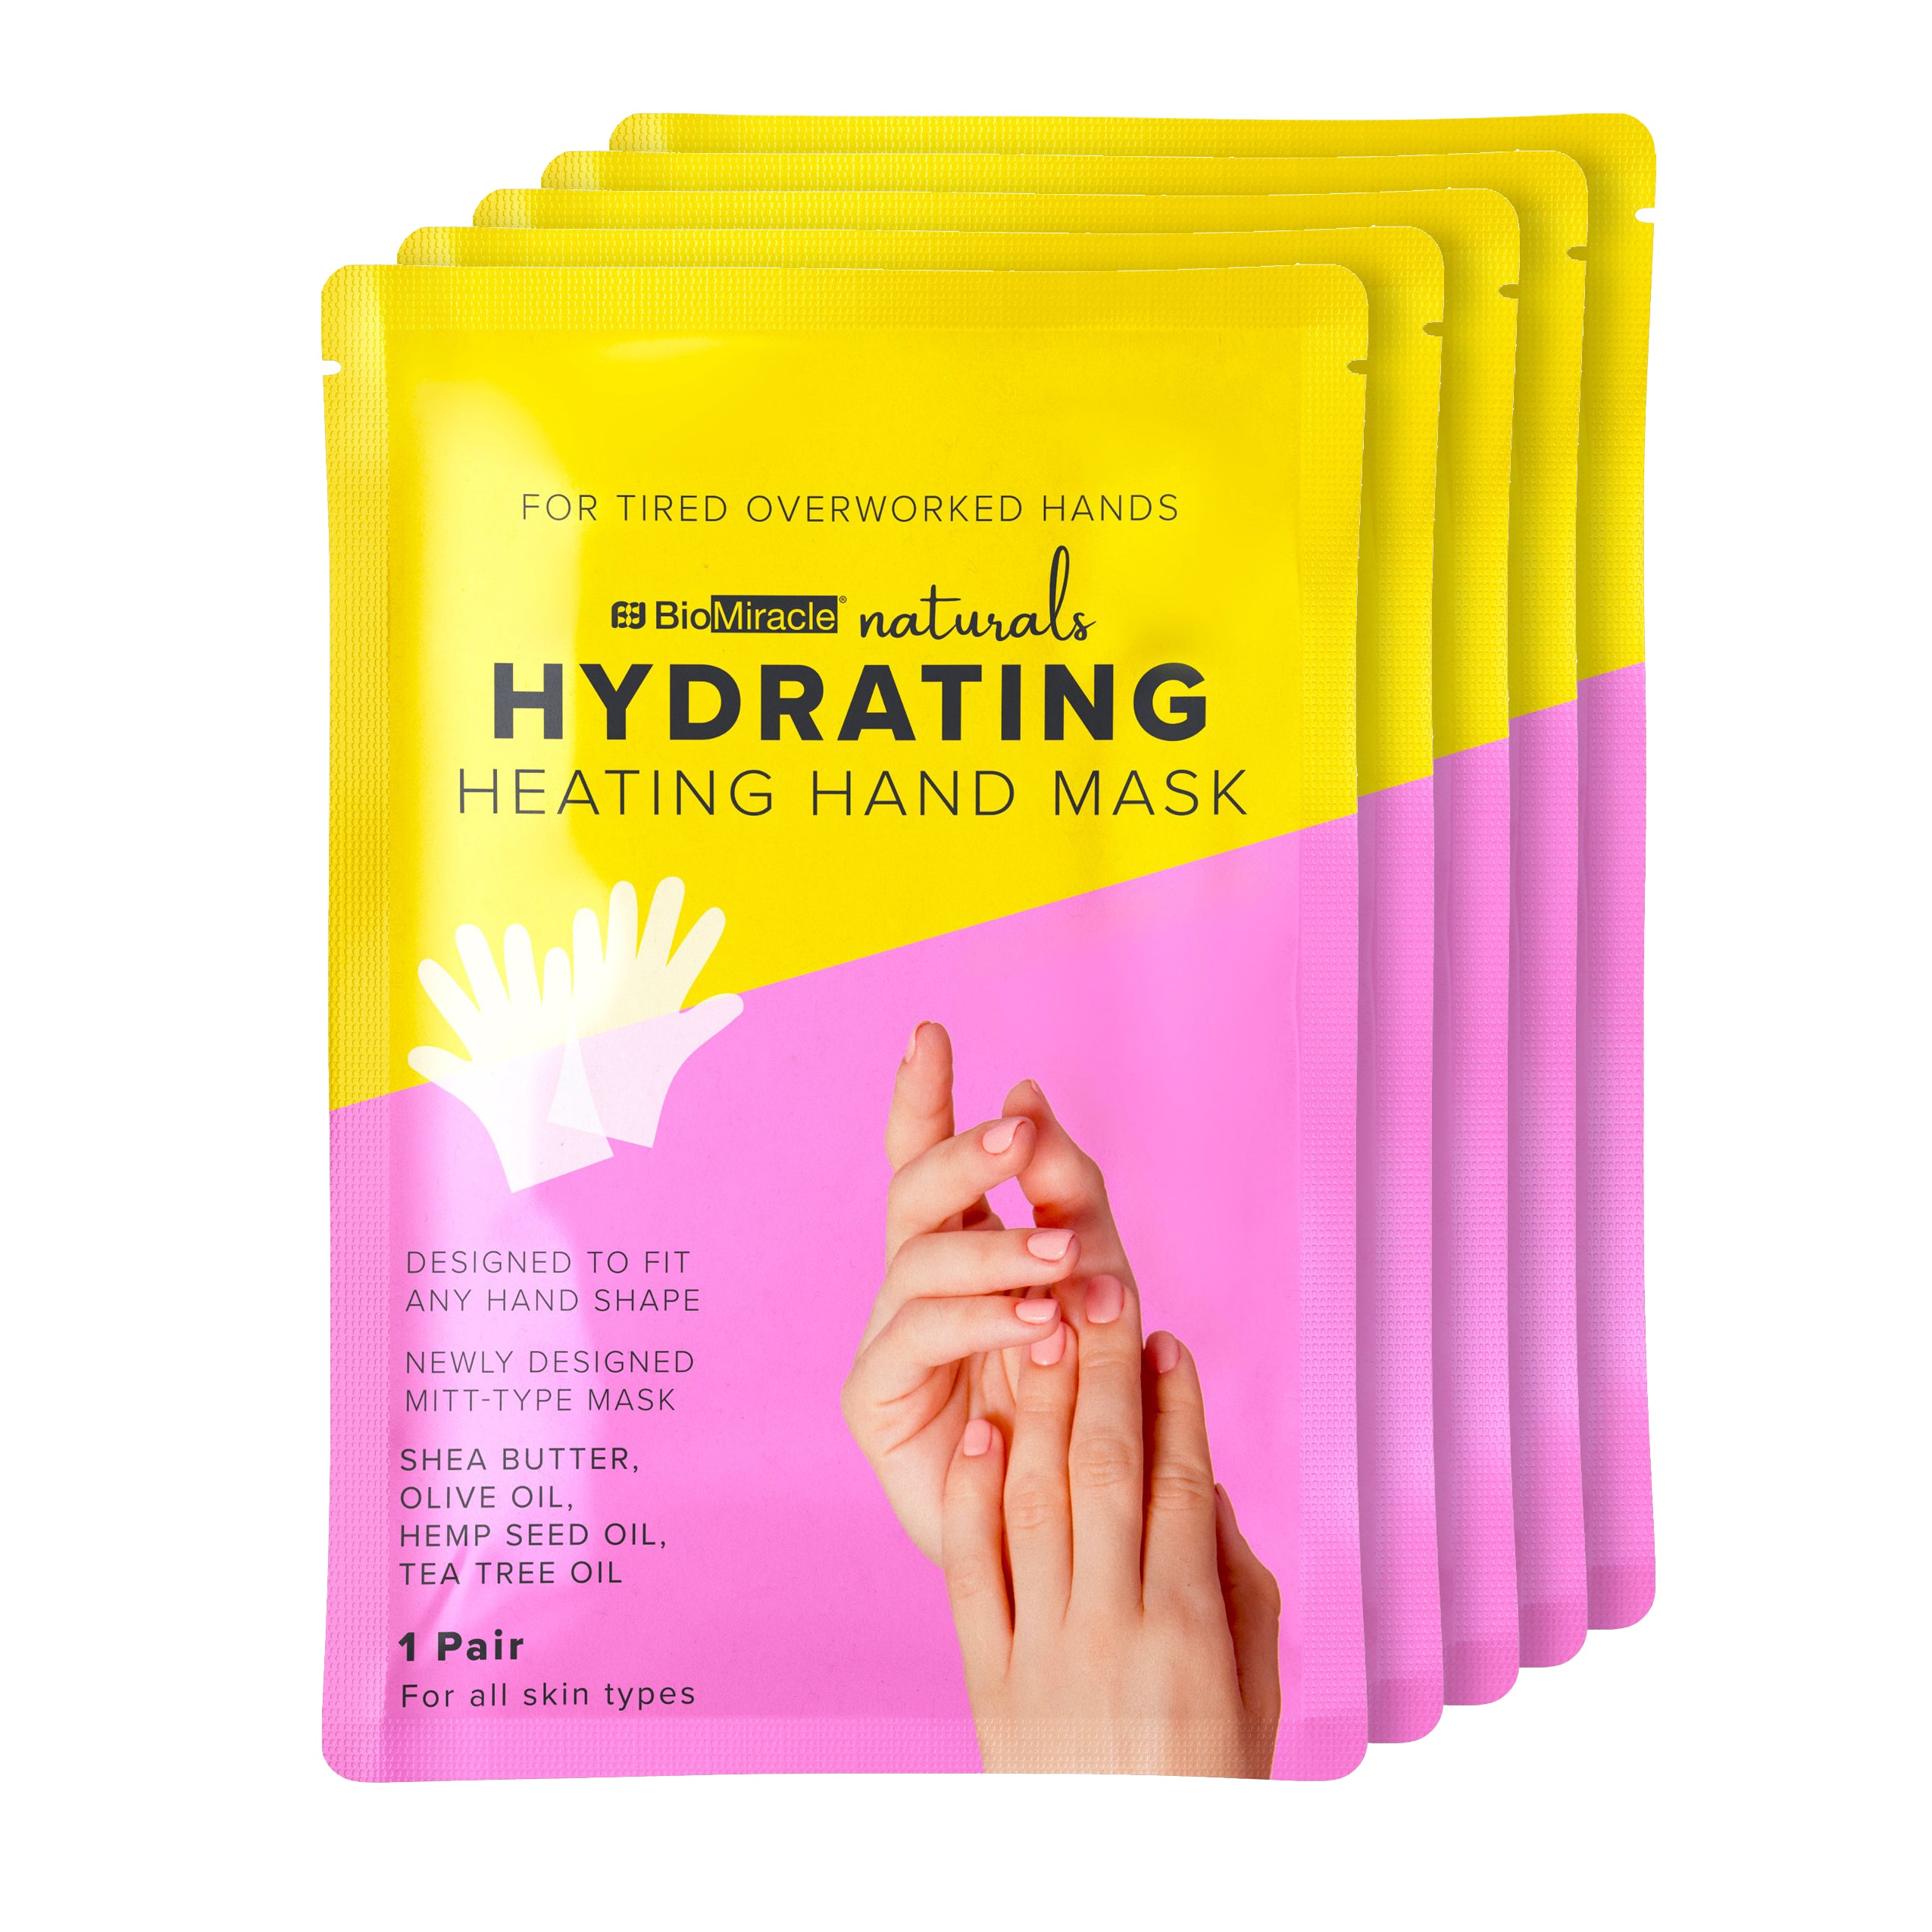 Hydrating Heating Hand Mask 5 Pack